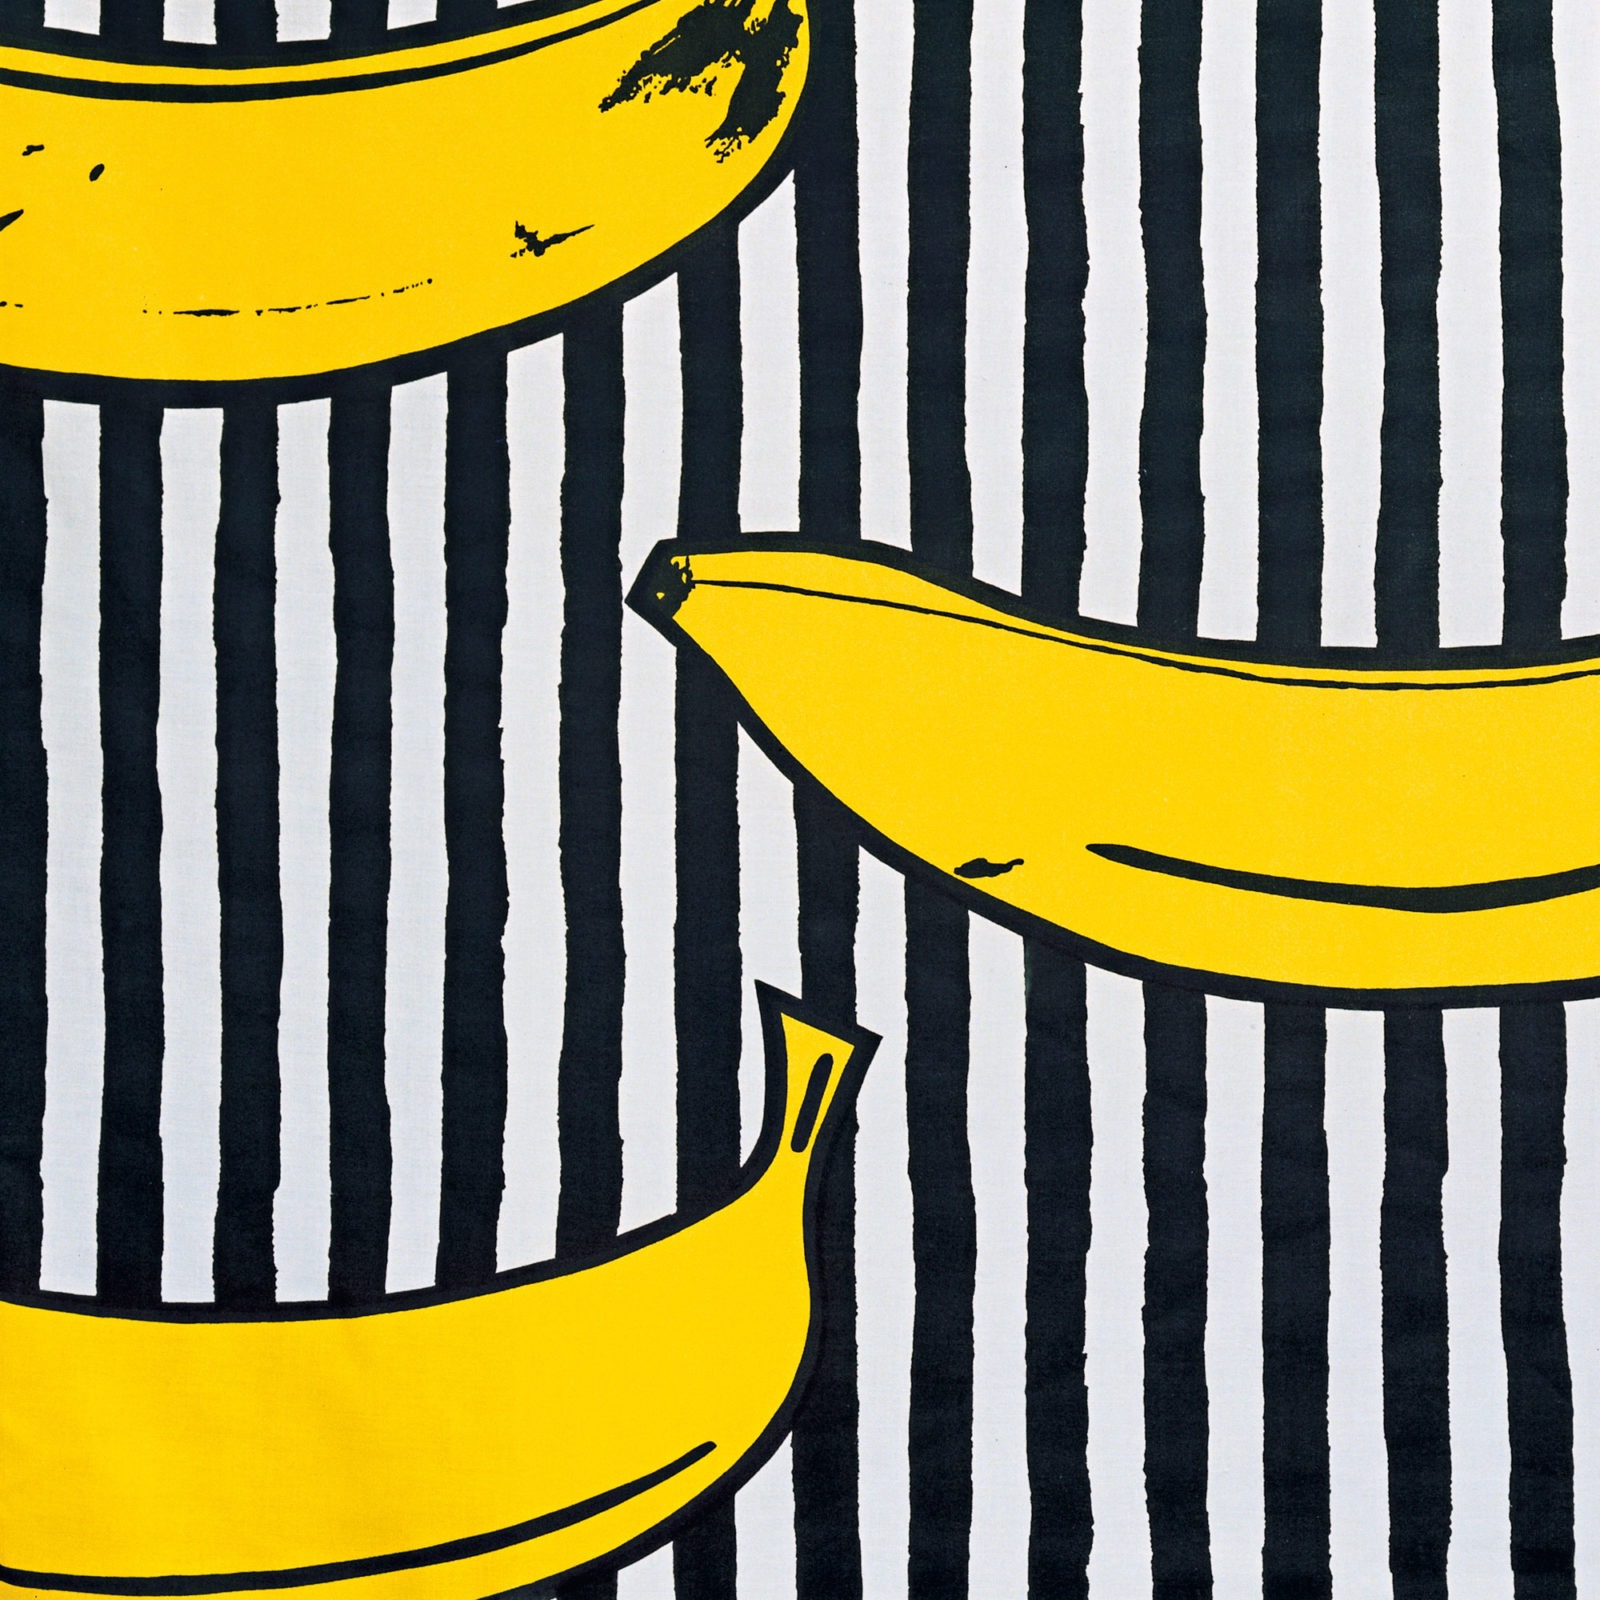 Fabric pattern with bright yellow bananas against black and white stripes, RANDIG BANAN.